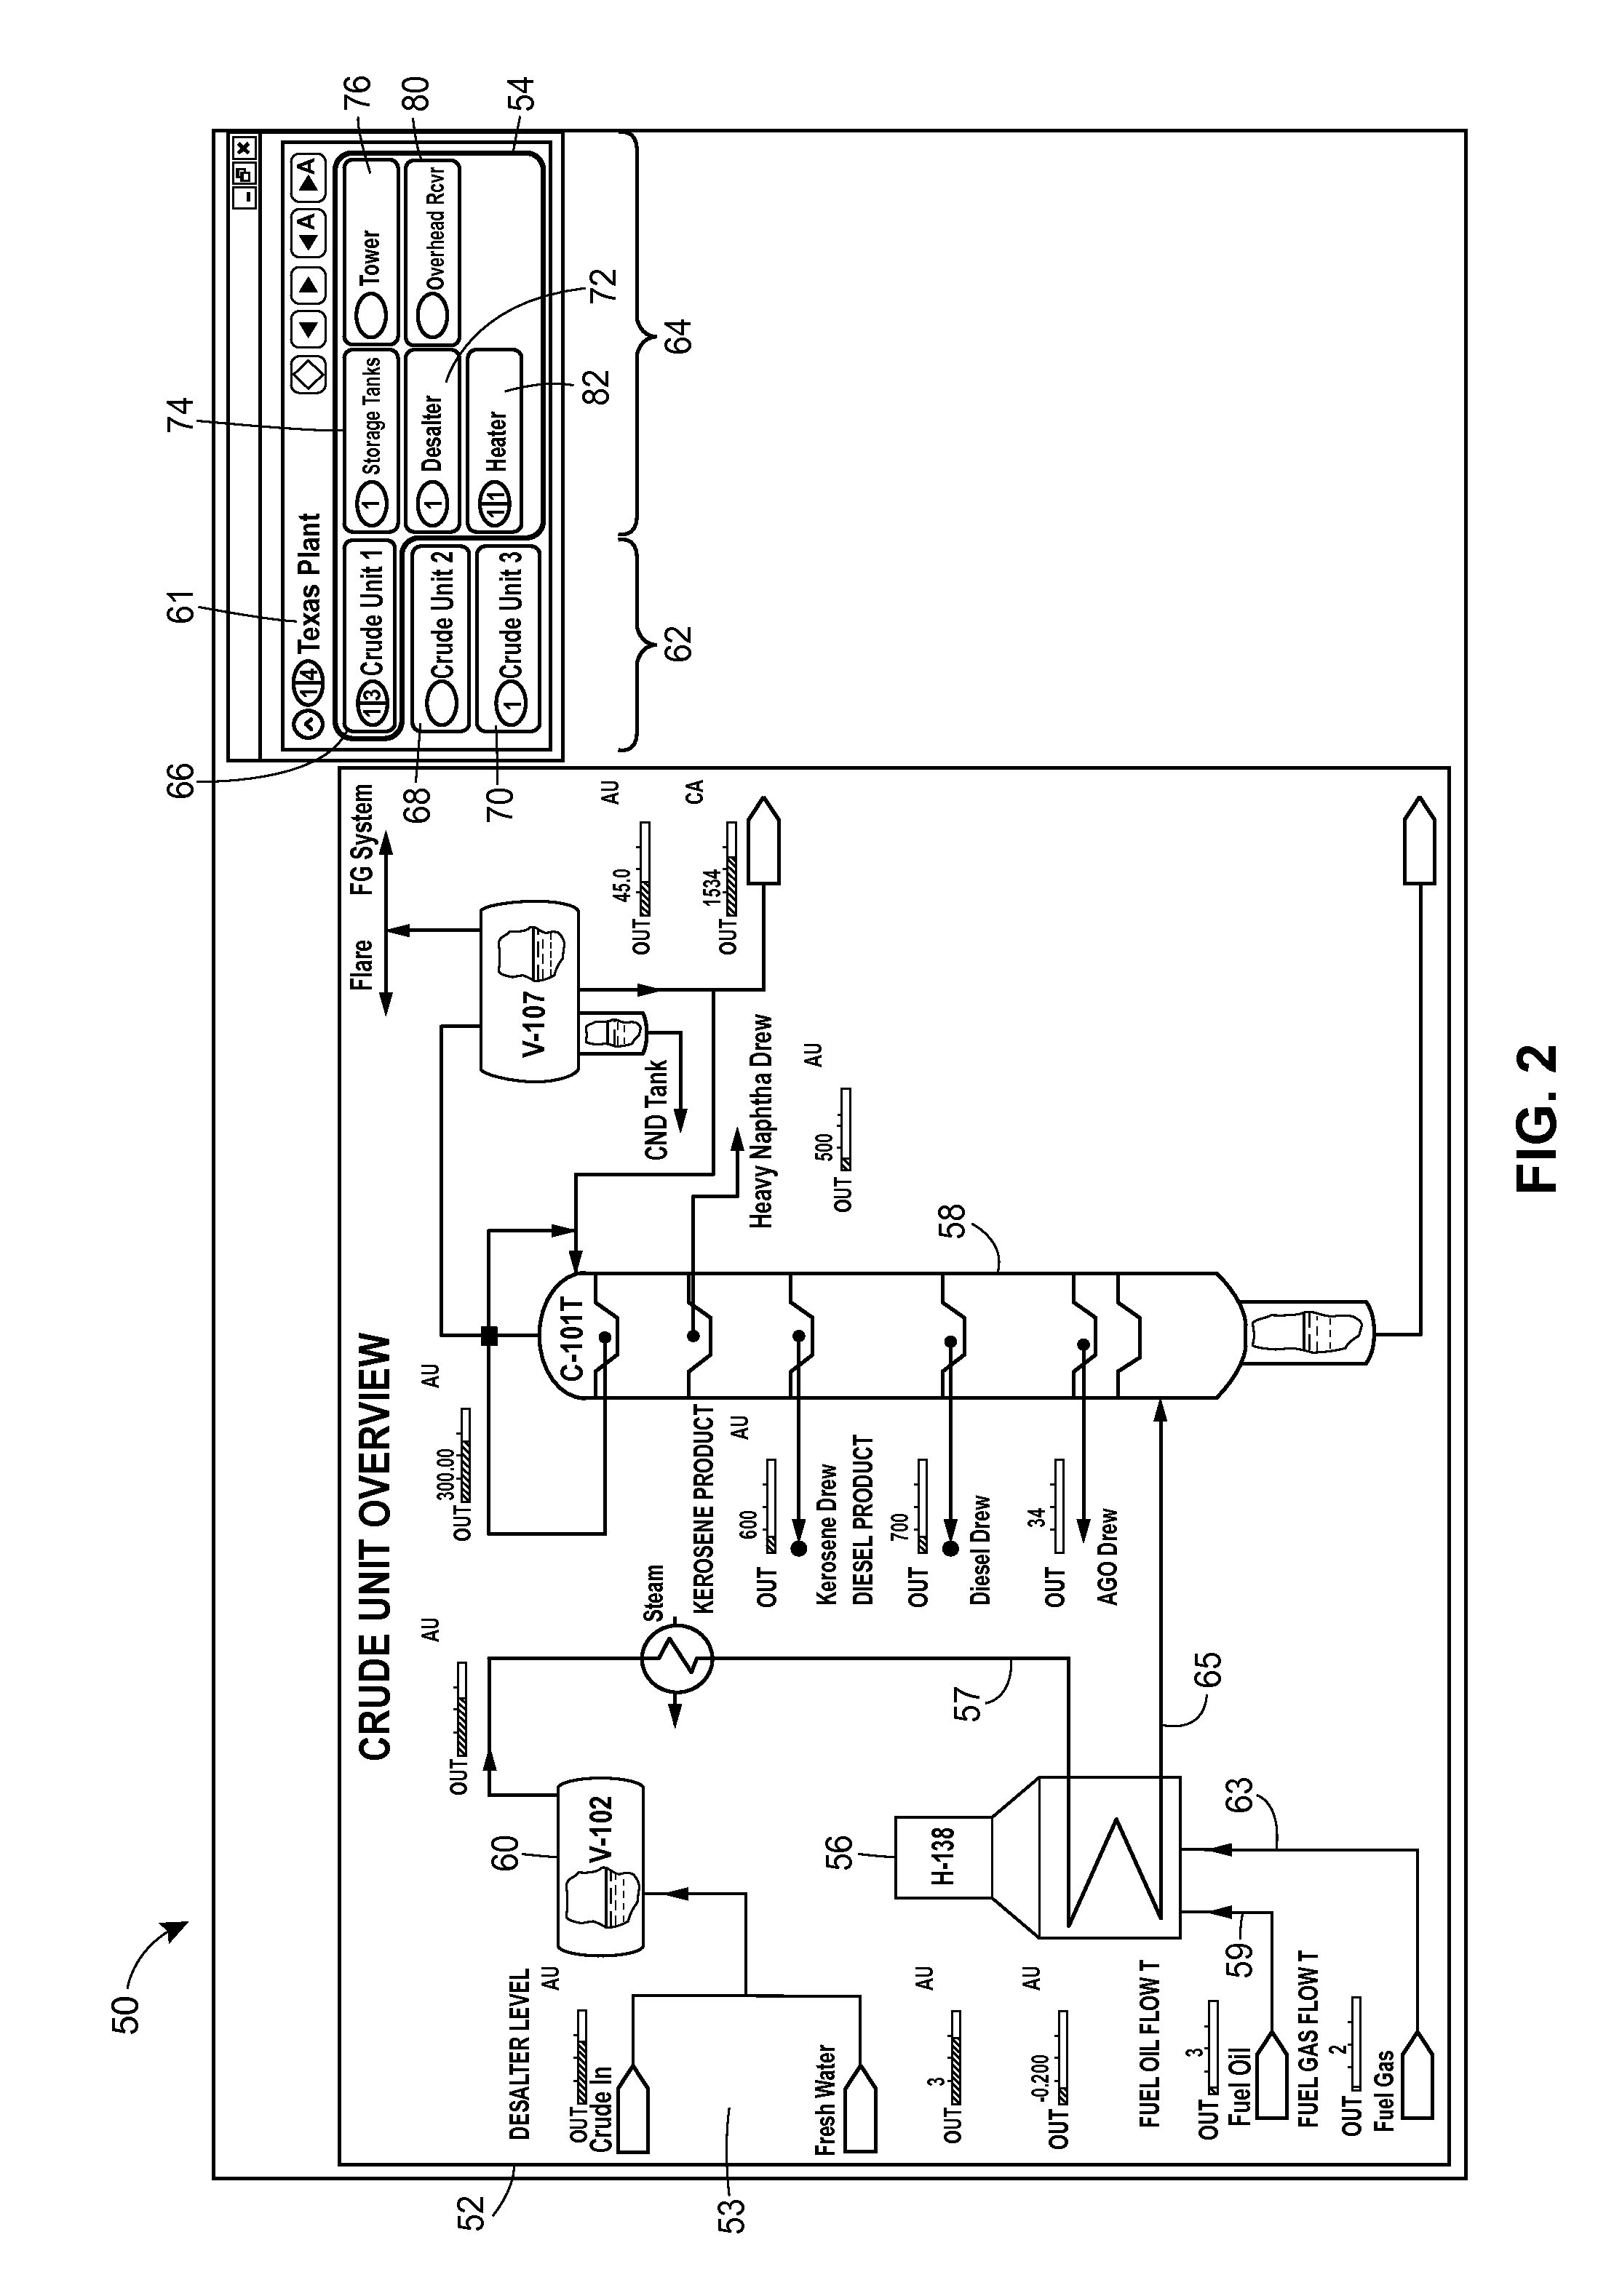 Graphical Process Variable Trend Monitoring for a Process Control System